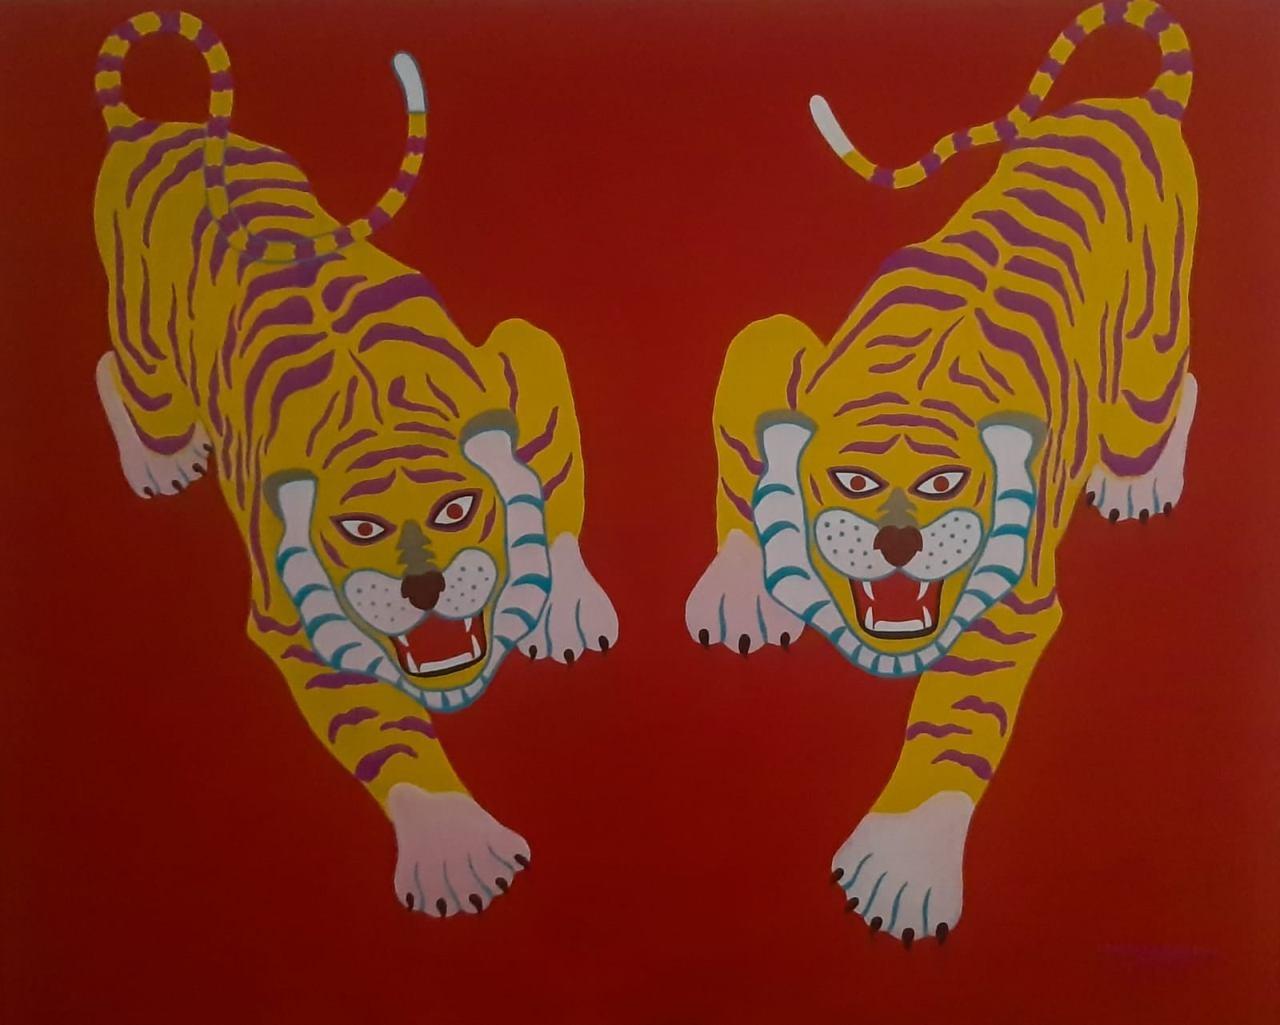 Debabrata Basu Animal Painting - Tigers, Acrylic on Canvas, Red, Yellow by Contemporary Indian Artist "In Stock"